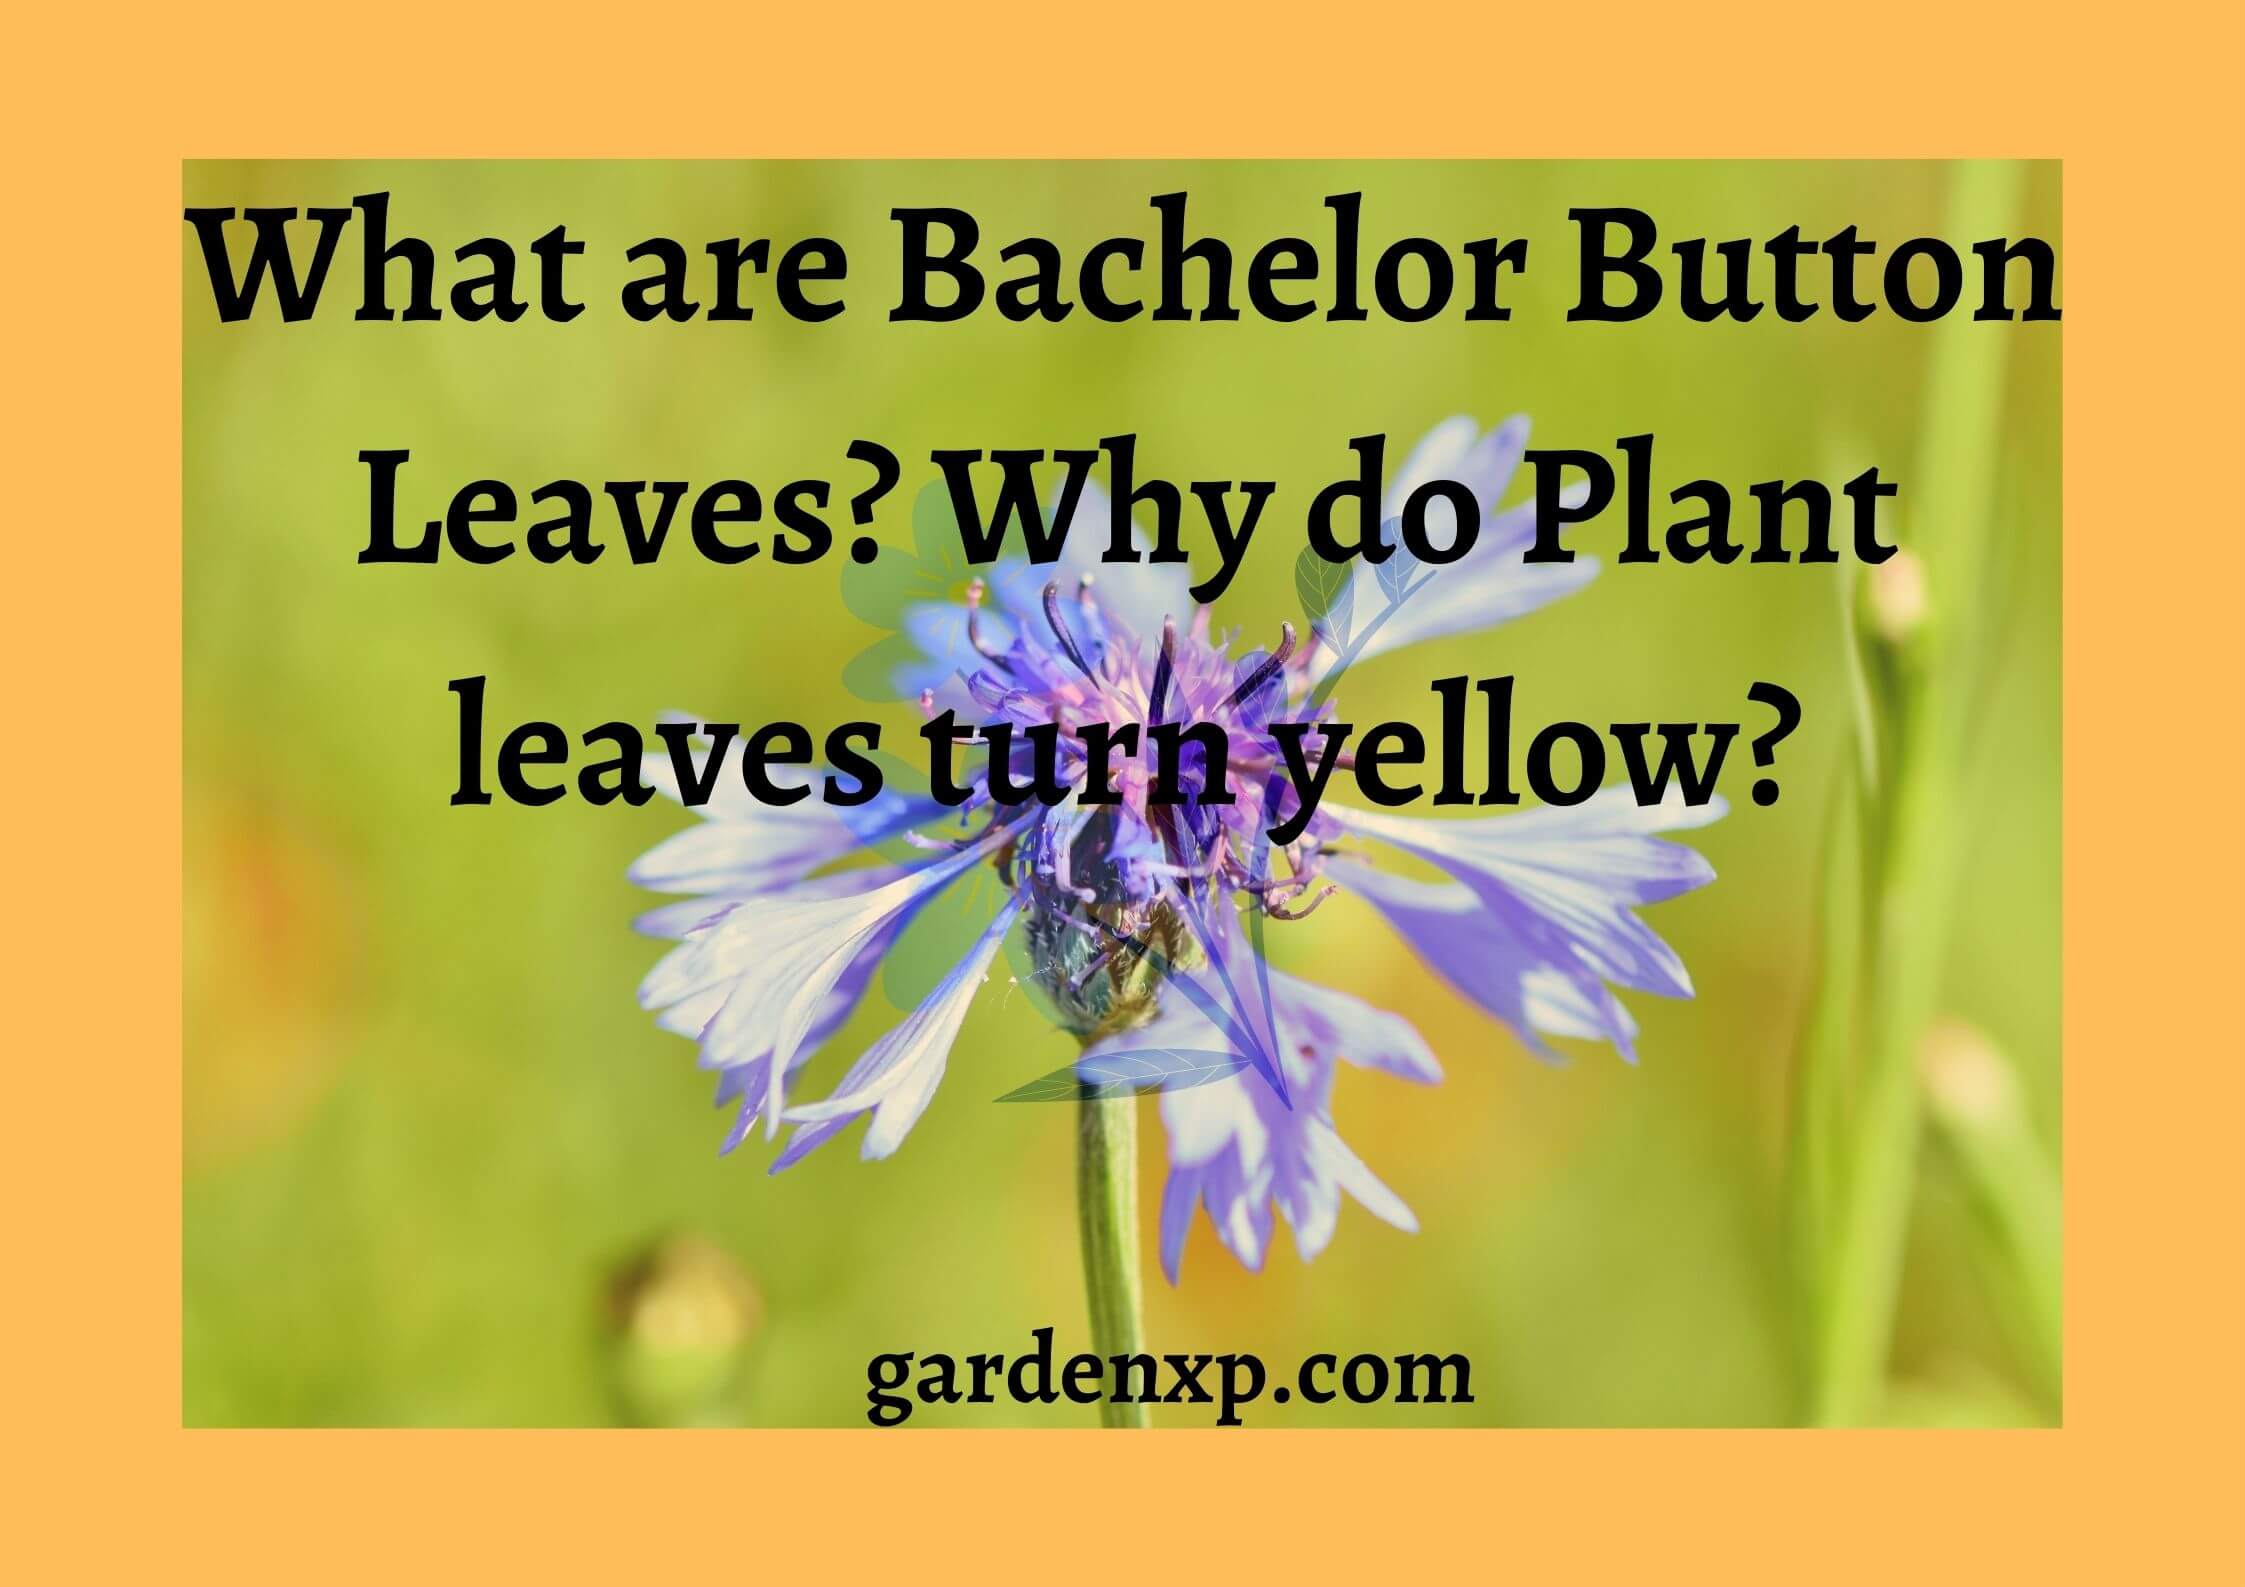 What are Bachelor Button Leaves? Why do Plant leaves turn yellow?